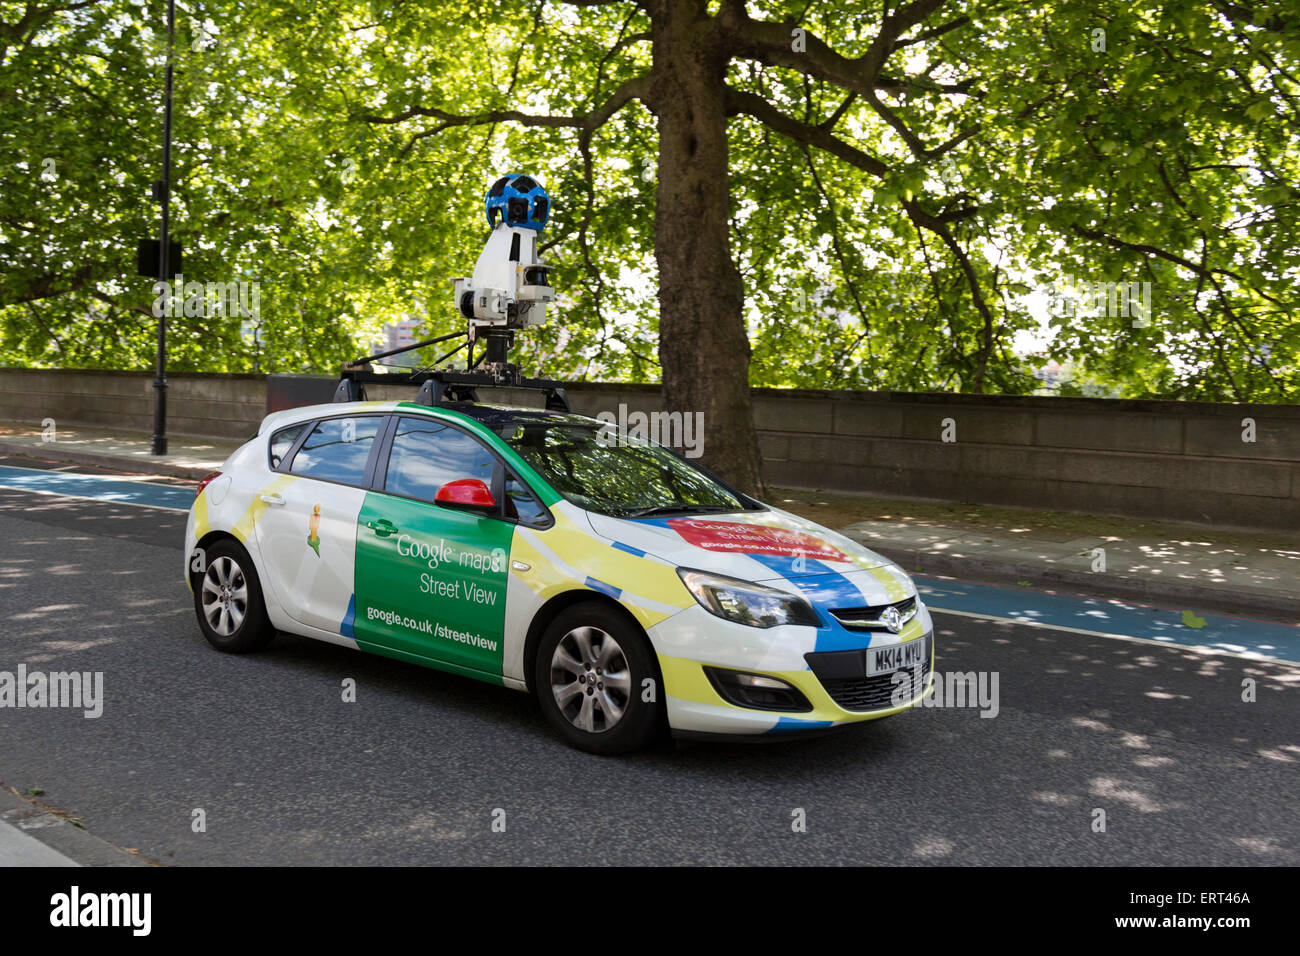 Google Street View Car with a mapping camera on its roof, Millbank, London, England, United Kingdom Stock Photo